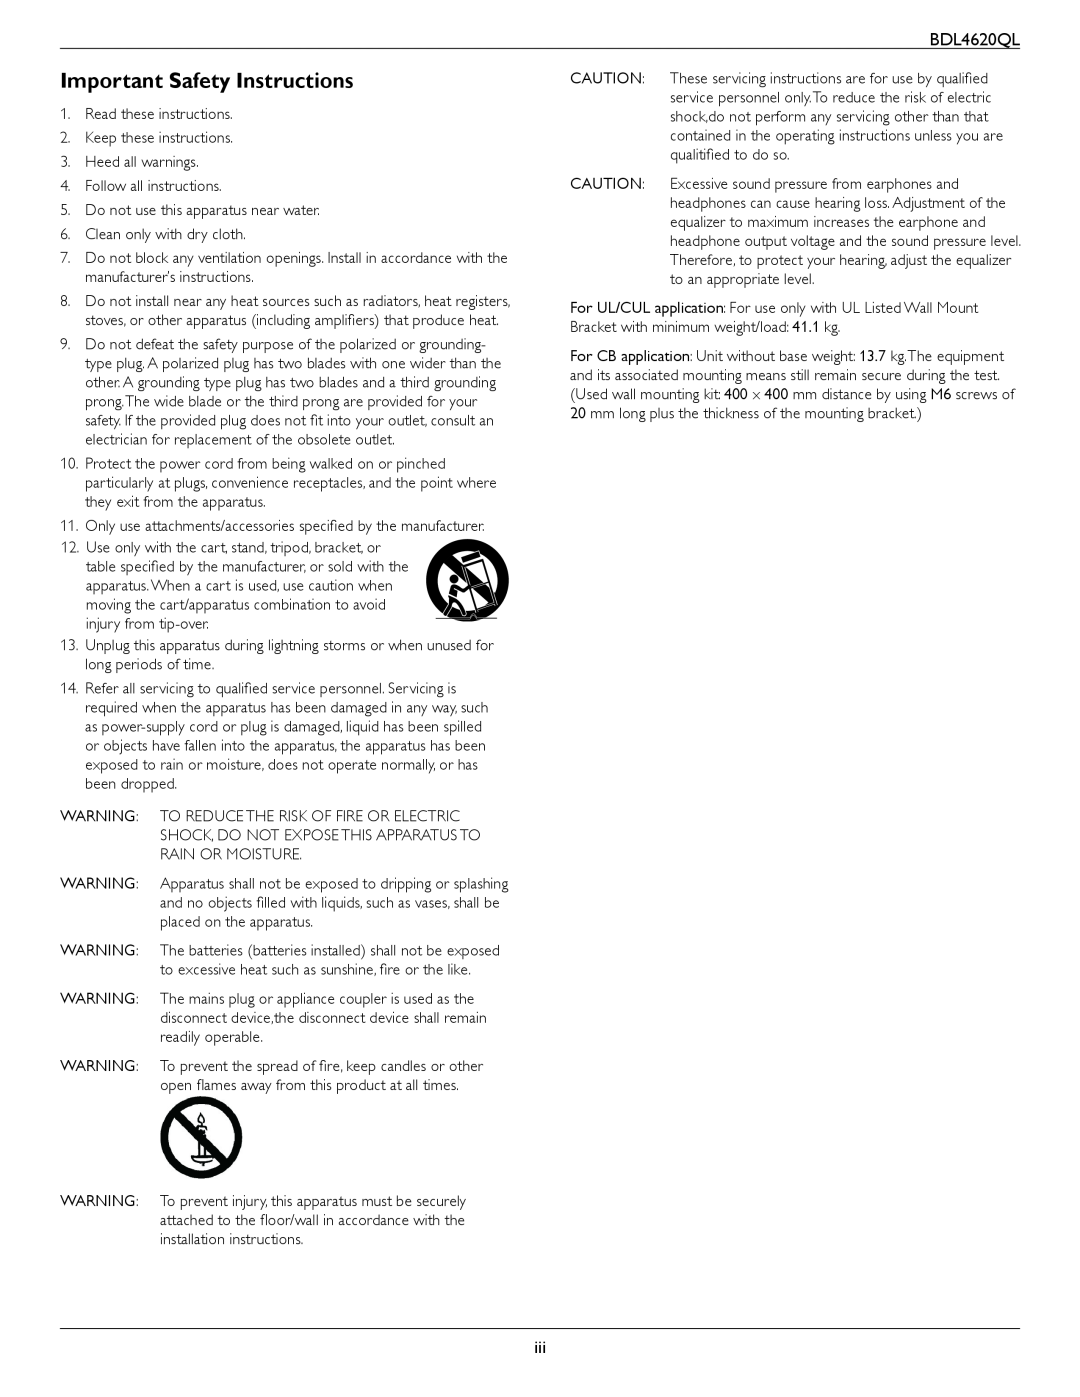 Philips BDL4620QL user manual Important Safety Instructions 